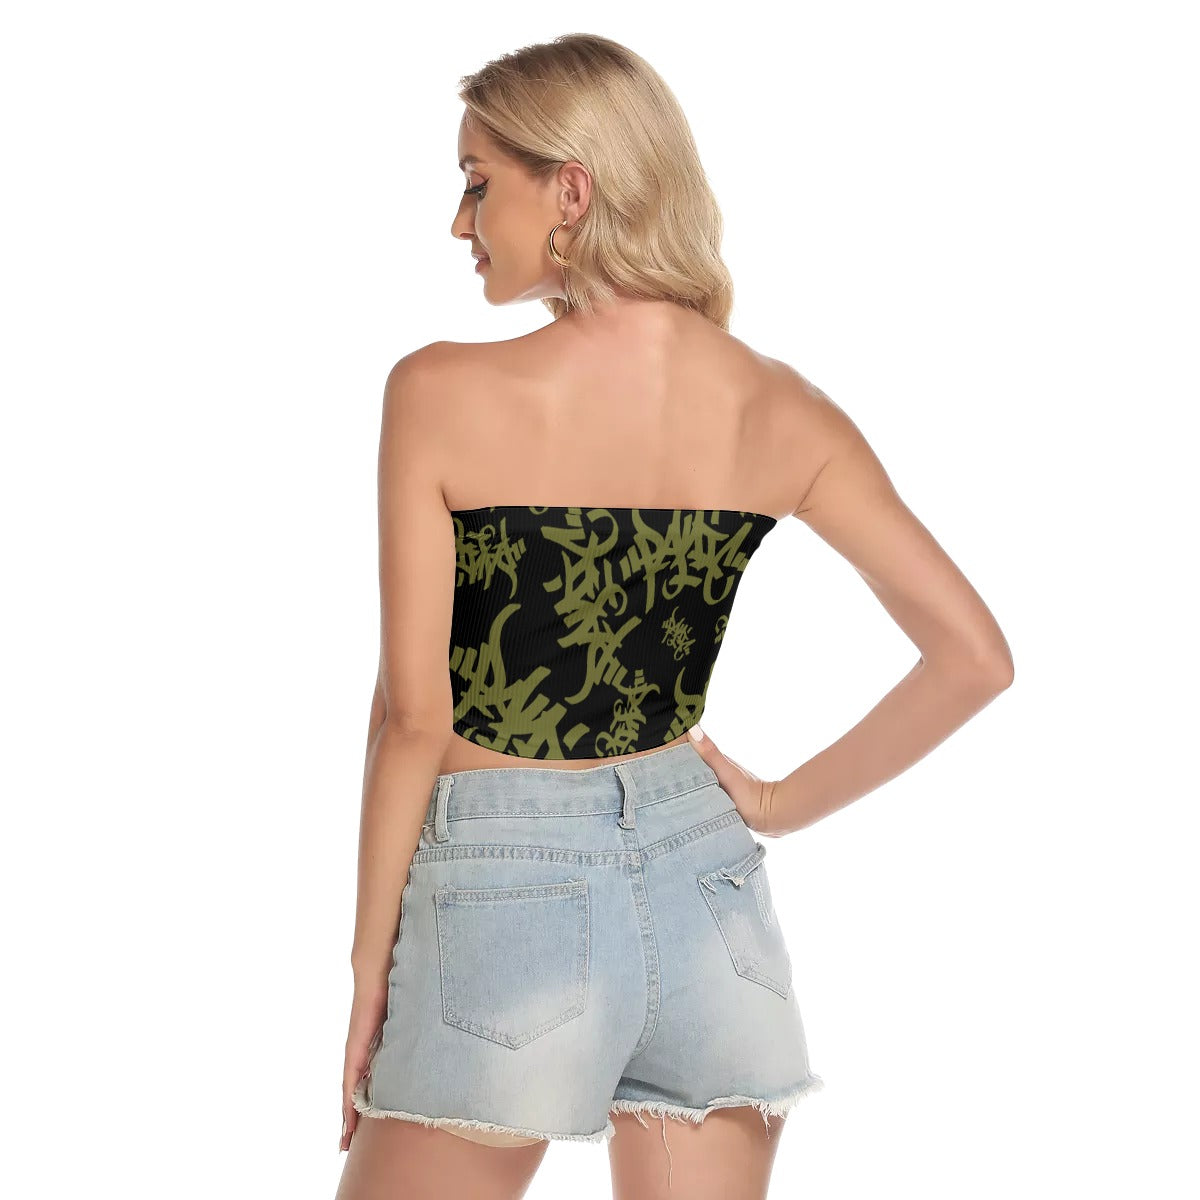 THE TAG TUBE TOP IN BLACK/OLIVE - Panic 39